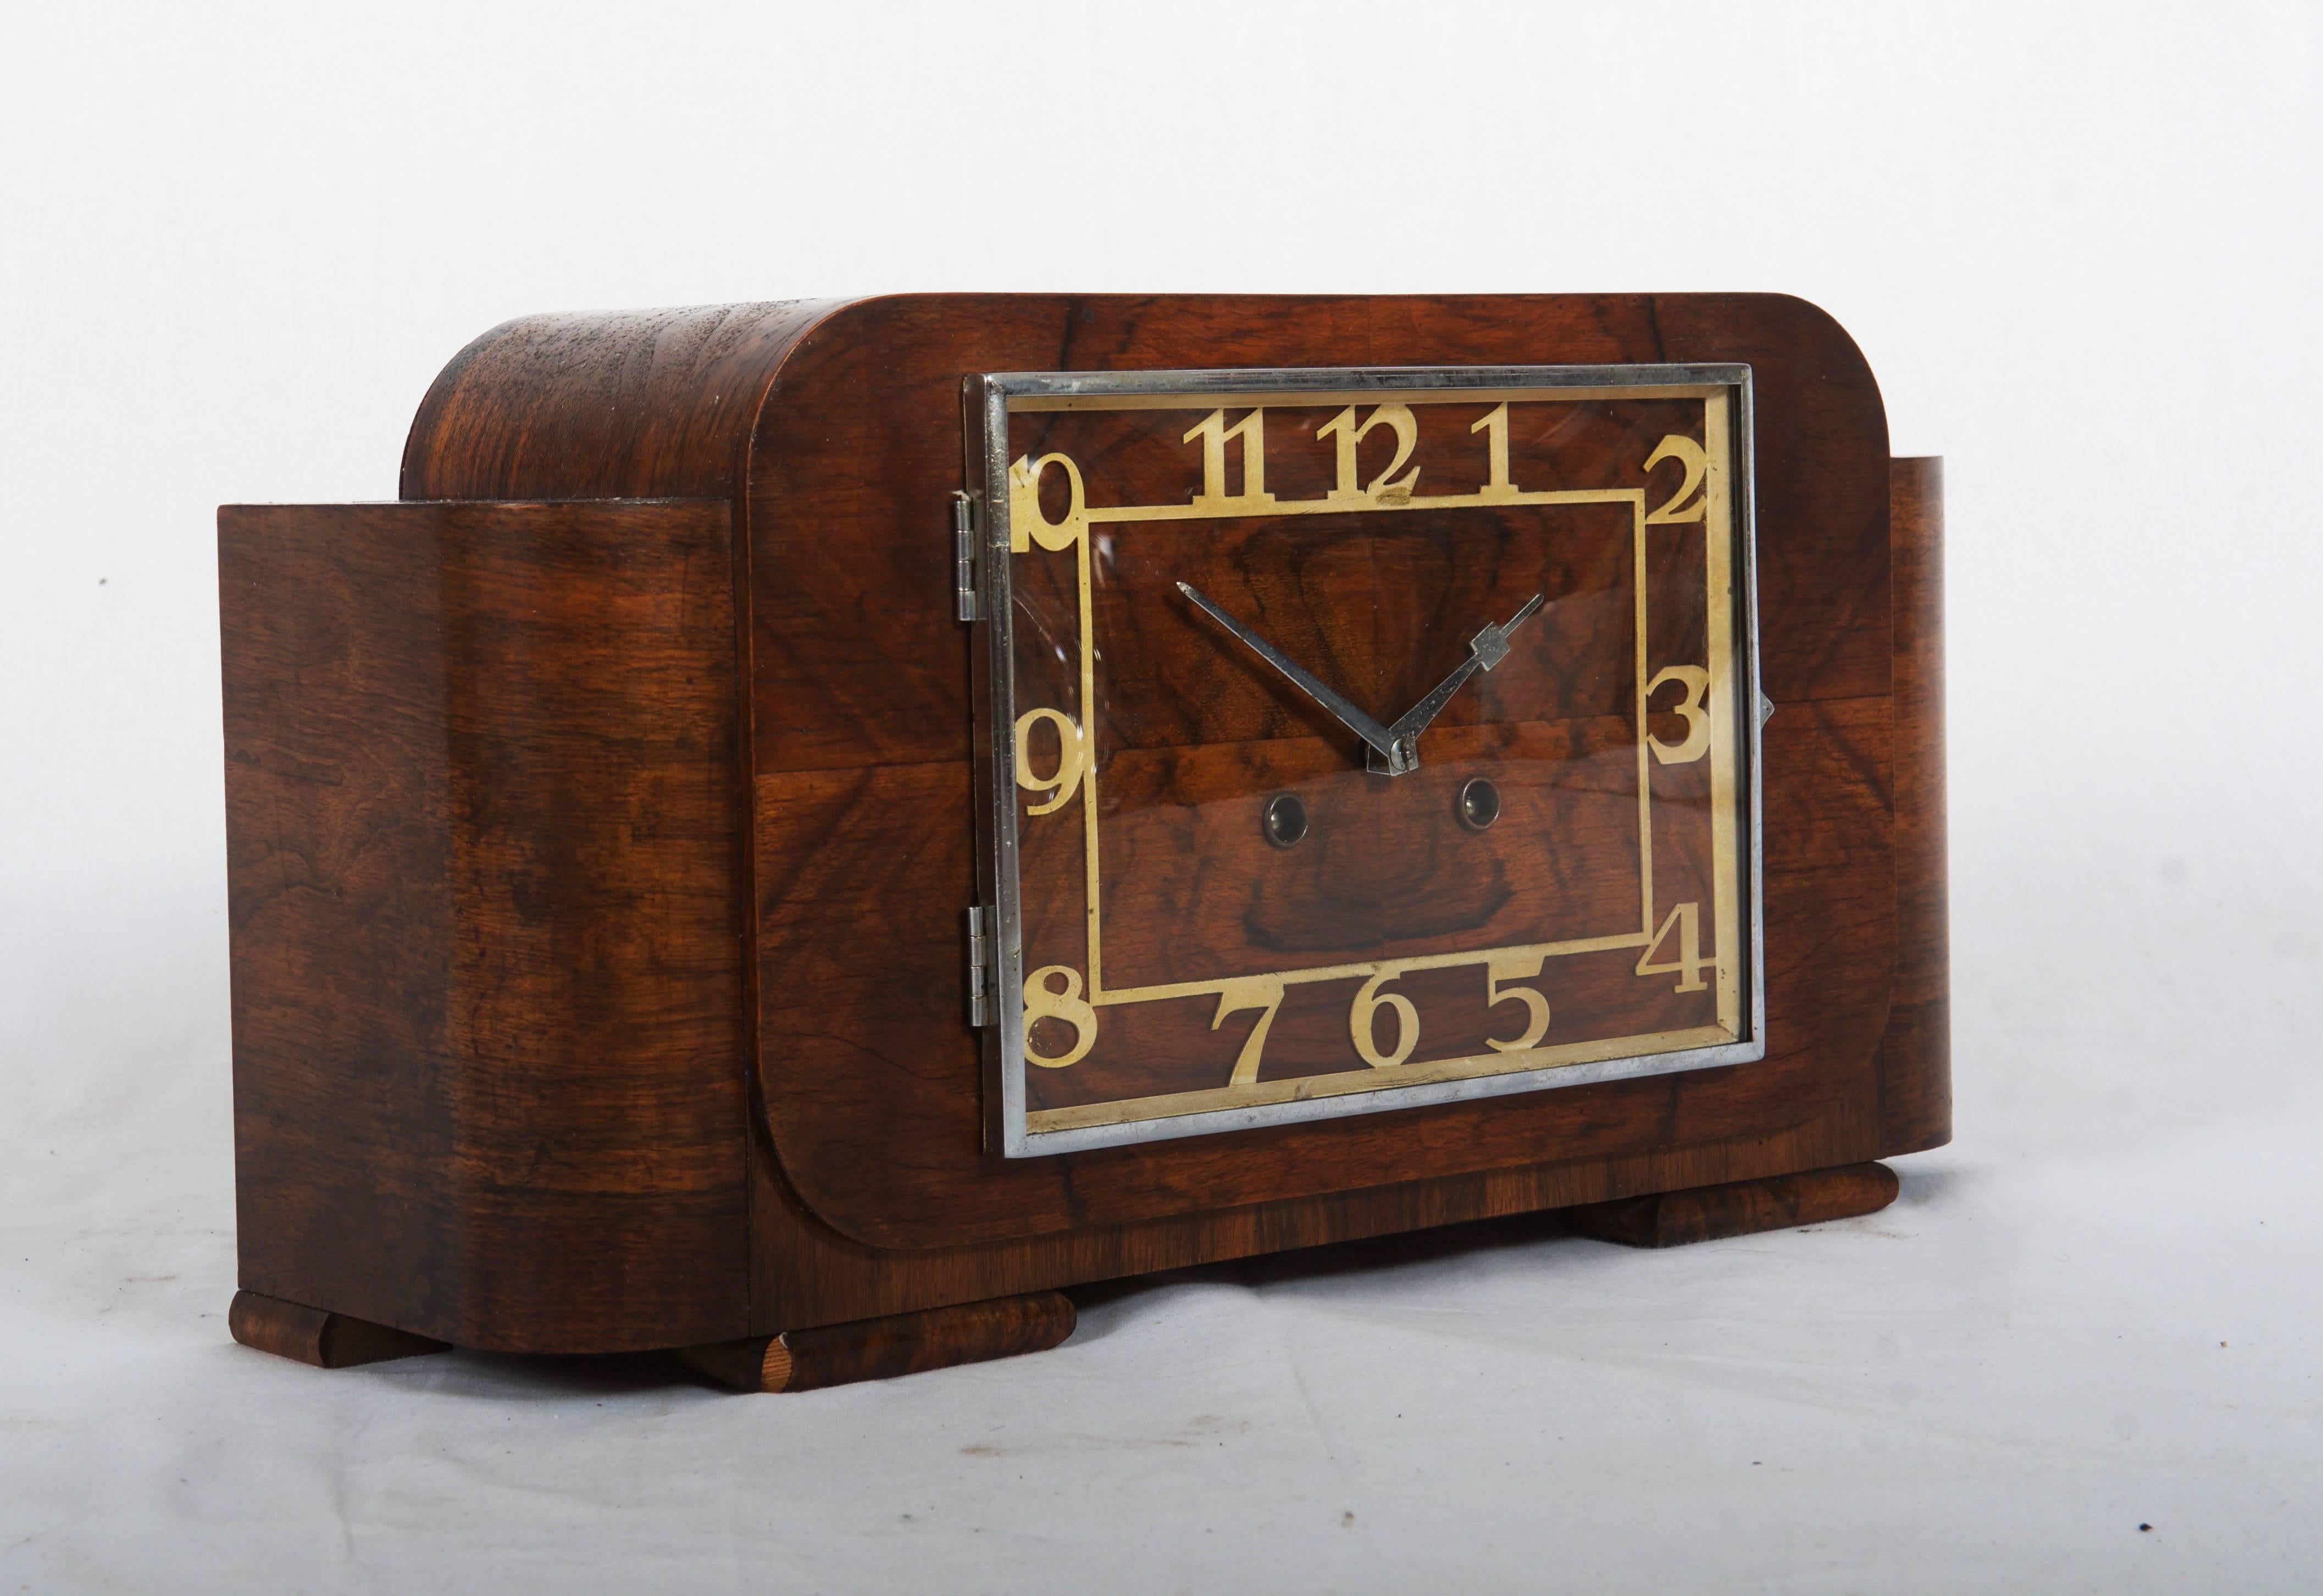 Softwood covered with a walnut veneer made in Germany by Junghans in the 1930s. 
Perfect original condition.
 